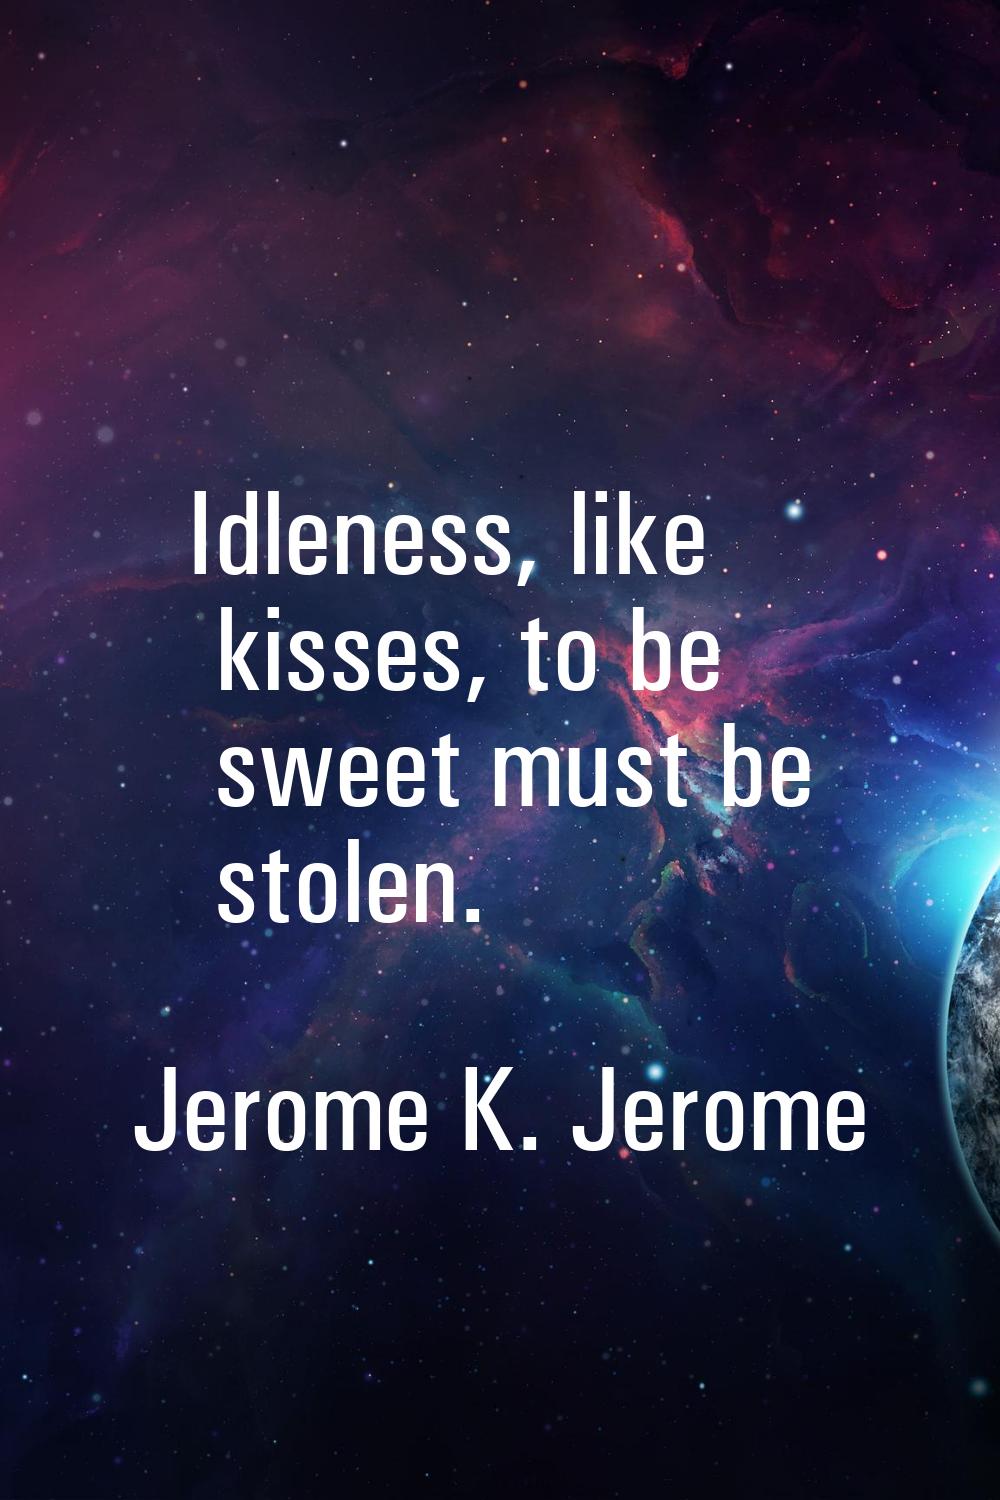 Idleness, like kisses, to be sweet must be stolen.